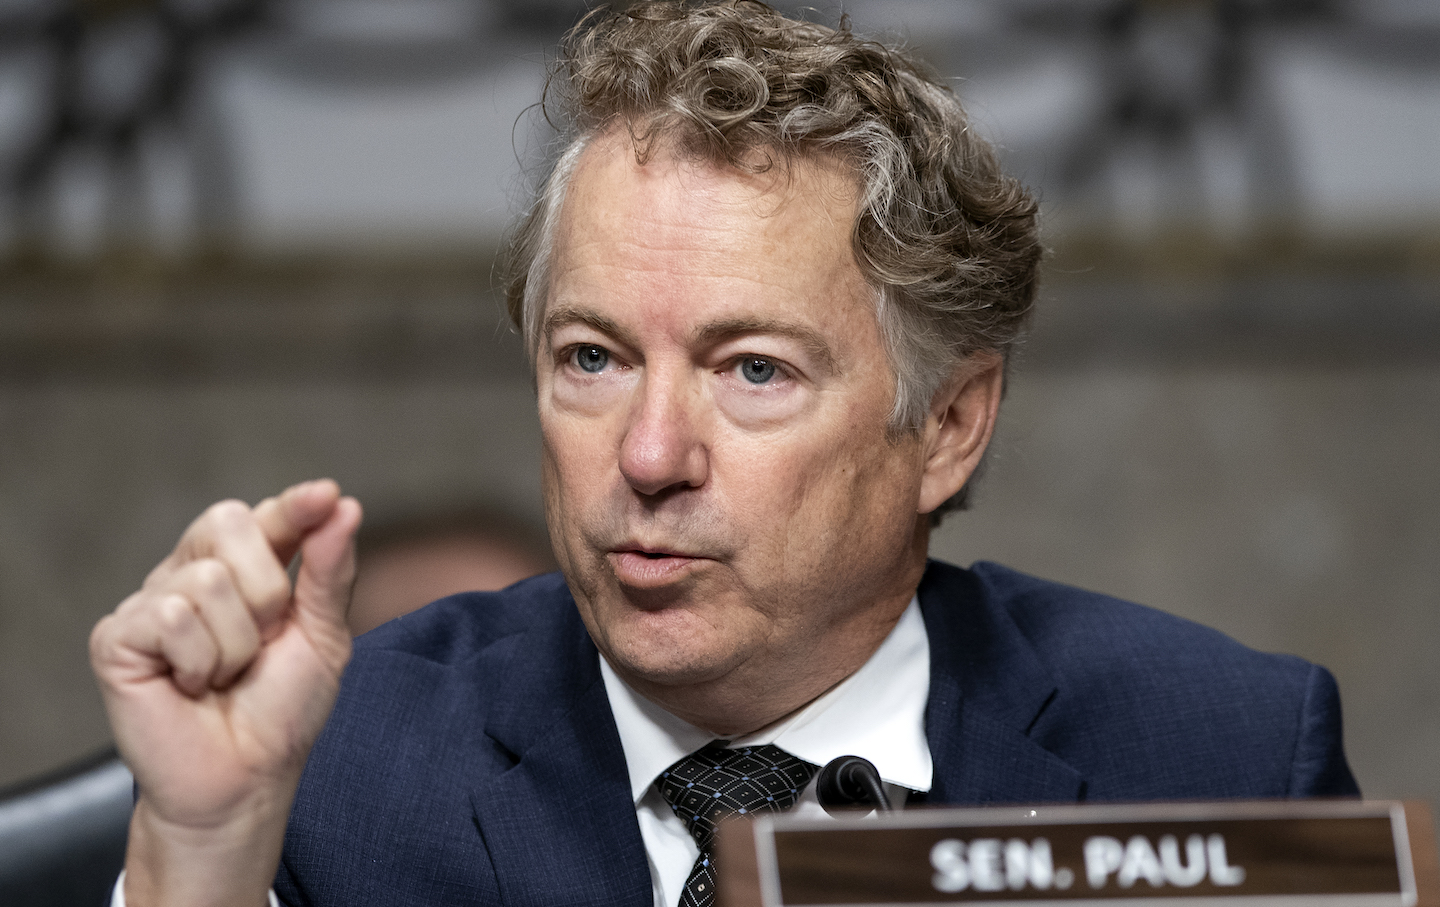 Rand Paul Abandons His Hippocratic Oath to Play Politics During a Pandemic